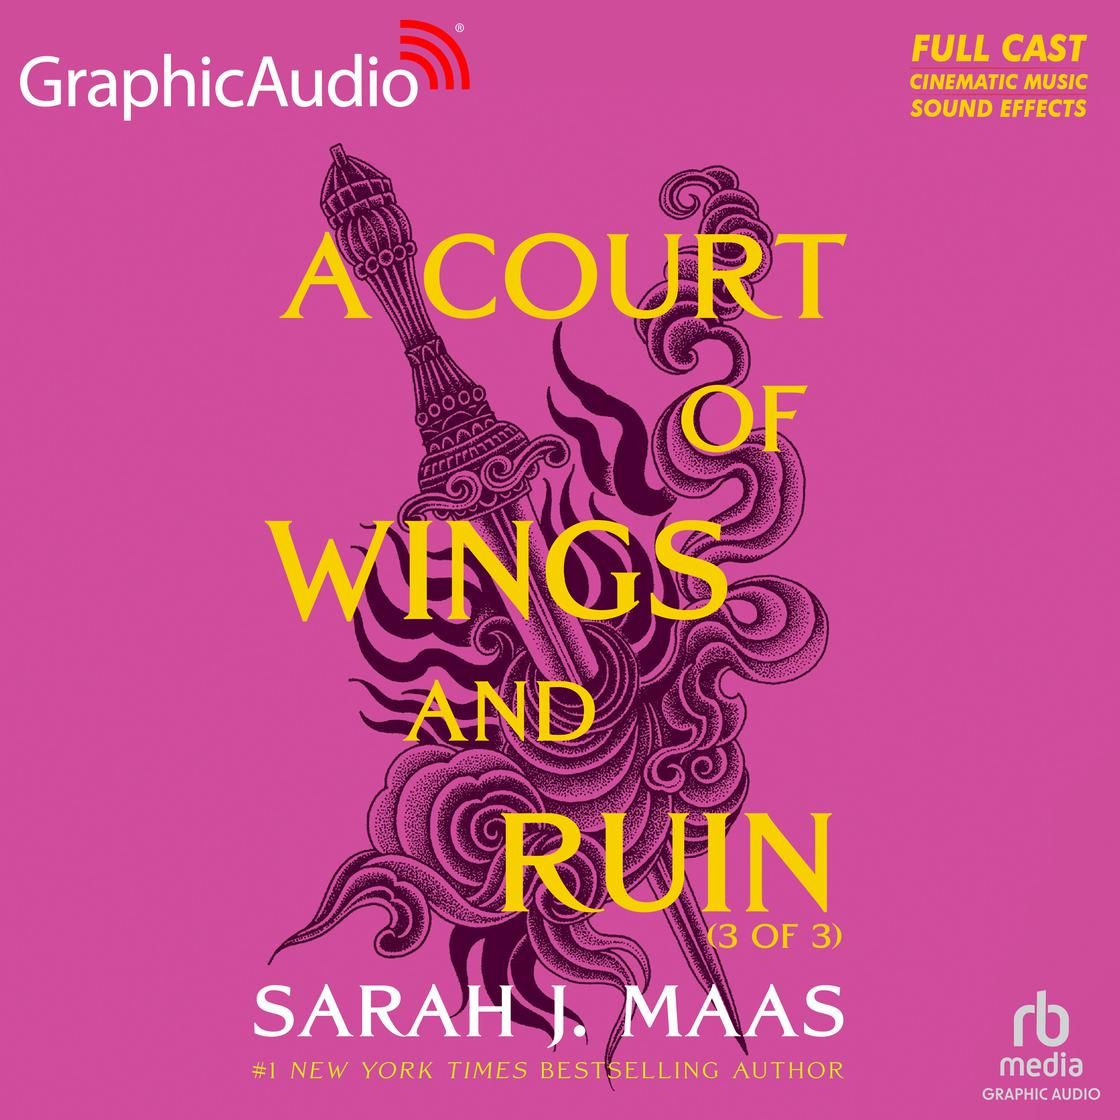 A Court of Wings and Ruin (3 of 3) [Dramatized Adaptation] | Libro.fm (US)